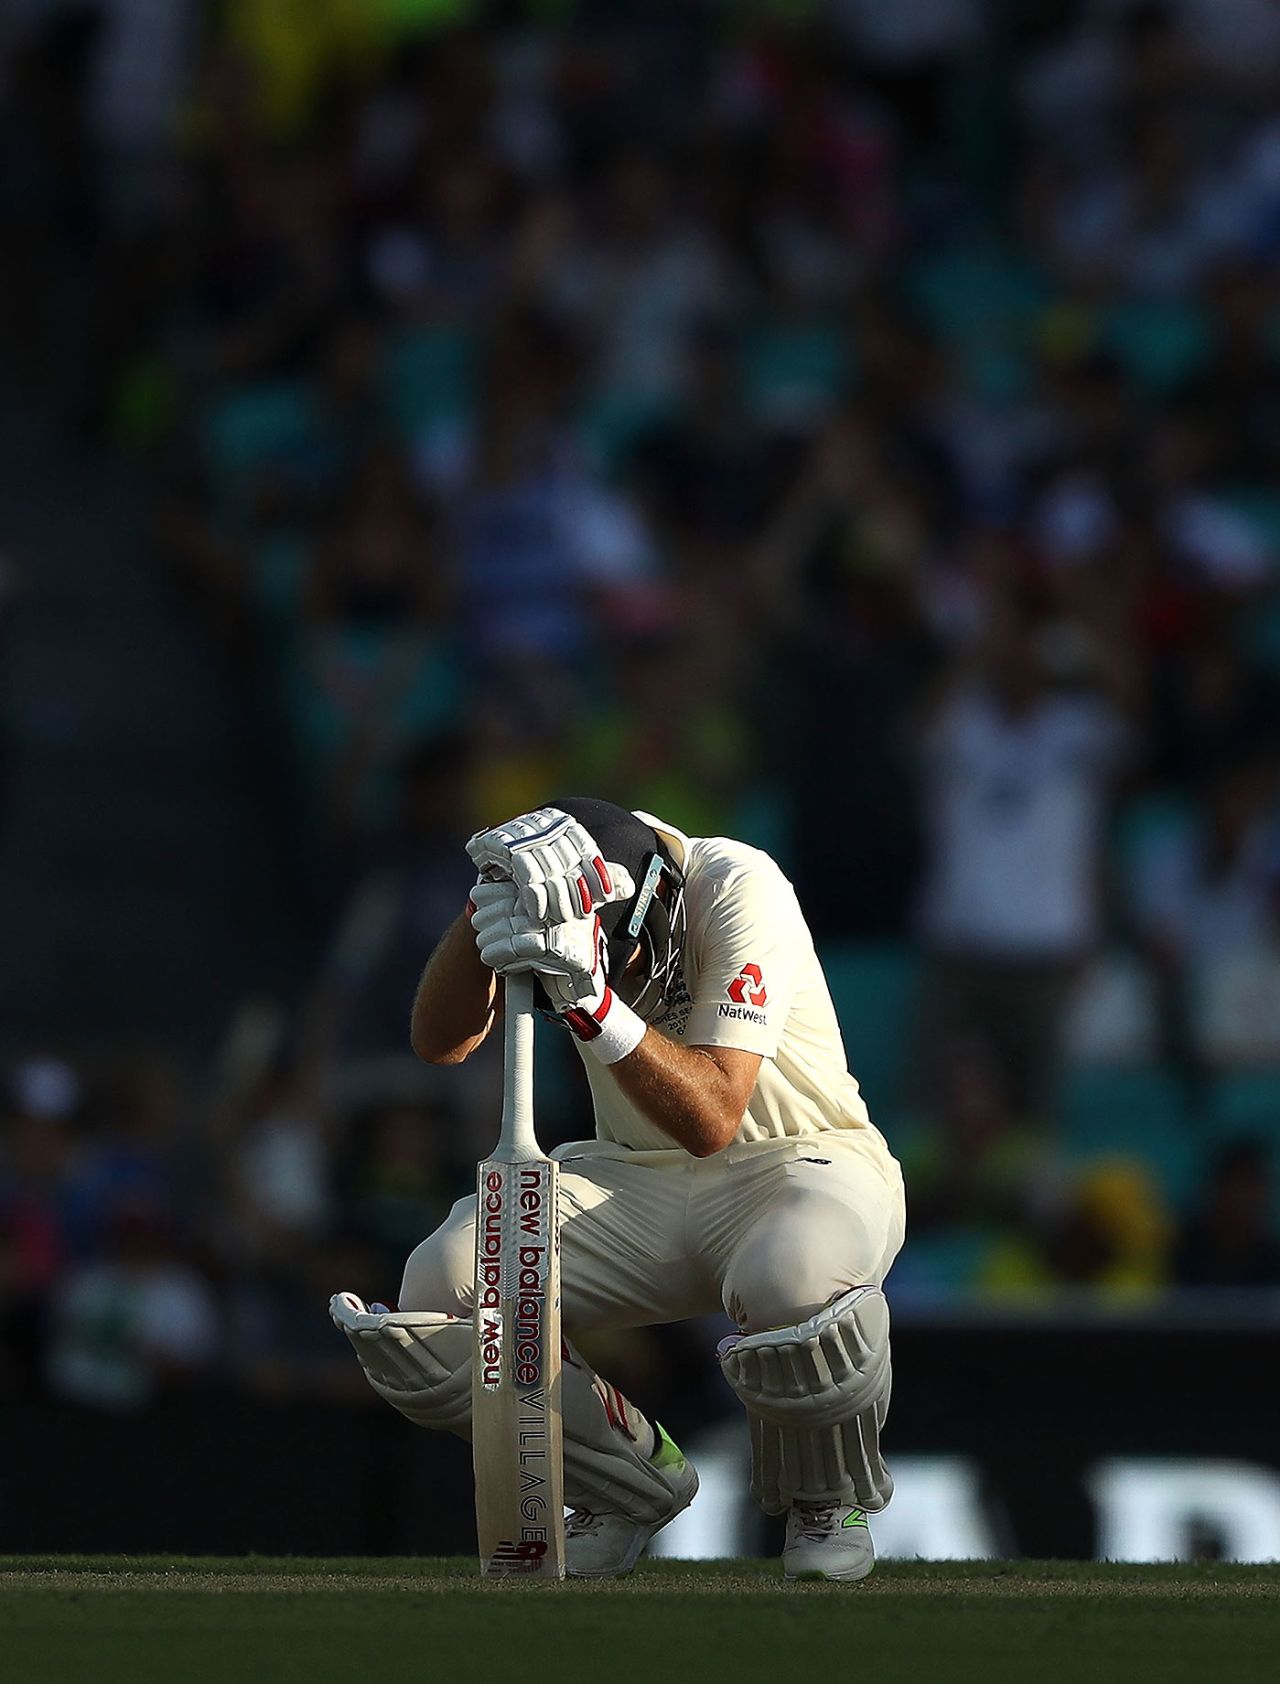 Joe Root fell for 83 in the closing moments of the first day, Australia v England, 5th Ashes Test, Sydney, 1st day, January 4, 2018